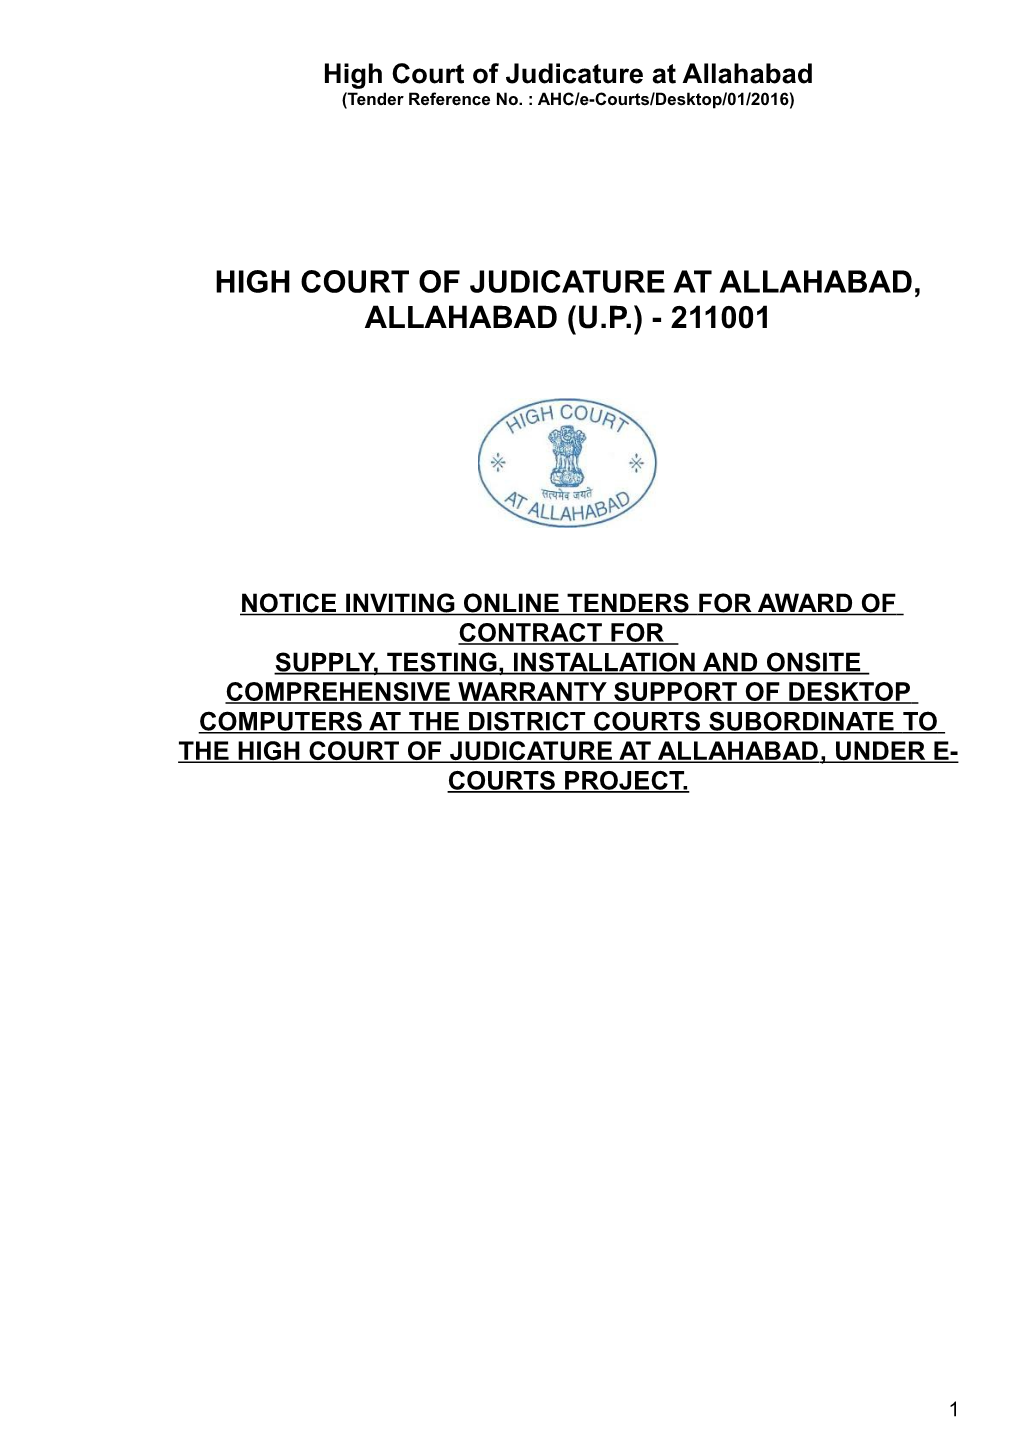 High Court of Judicature at Allahabad (Tender Reference No